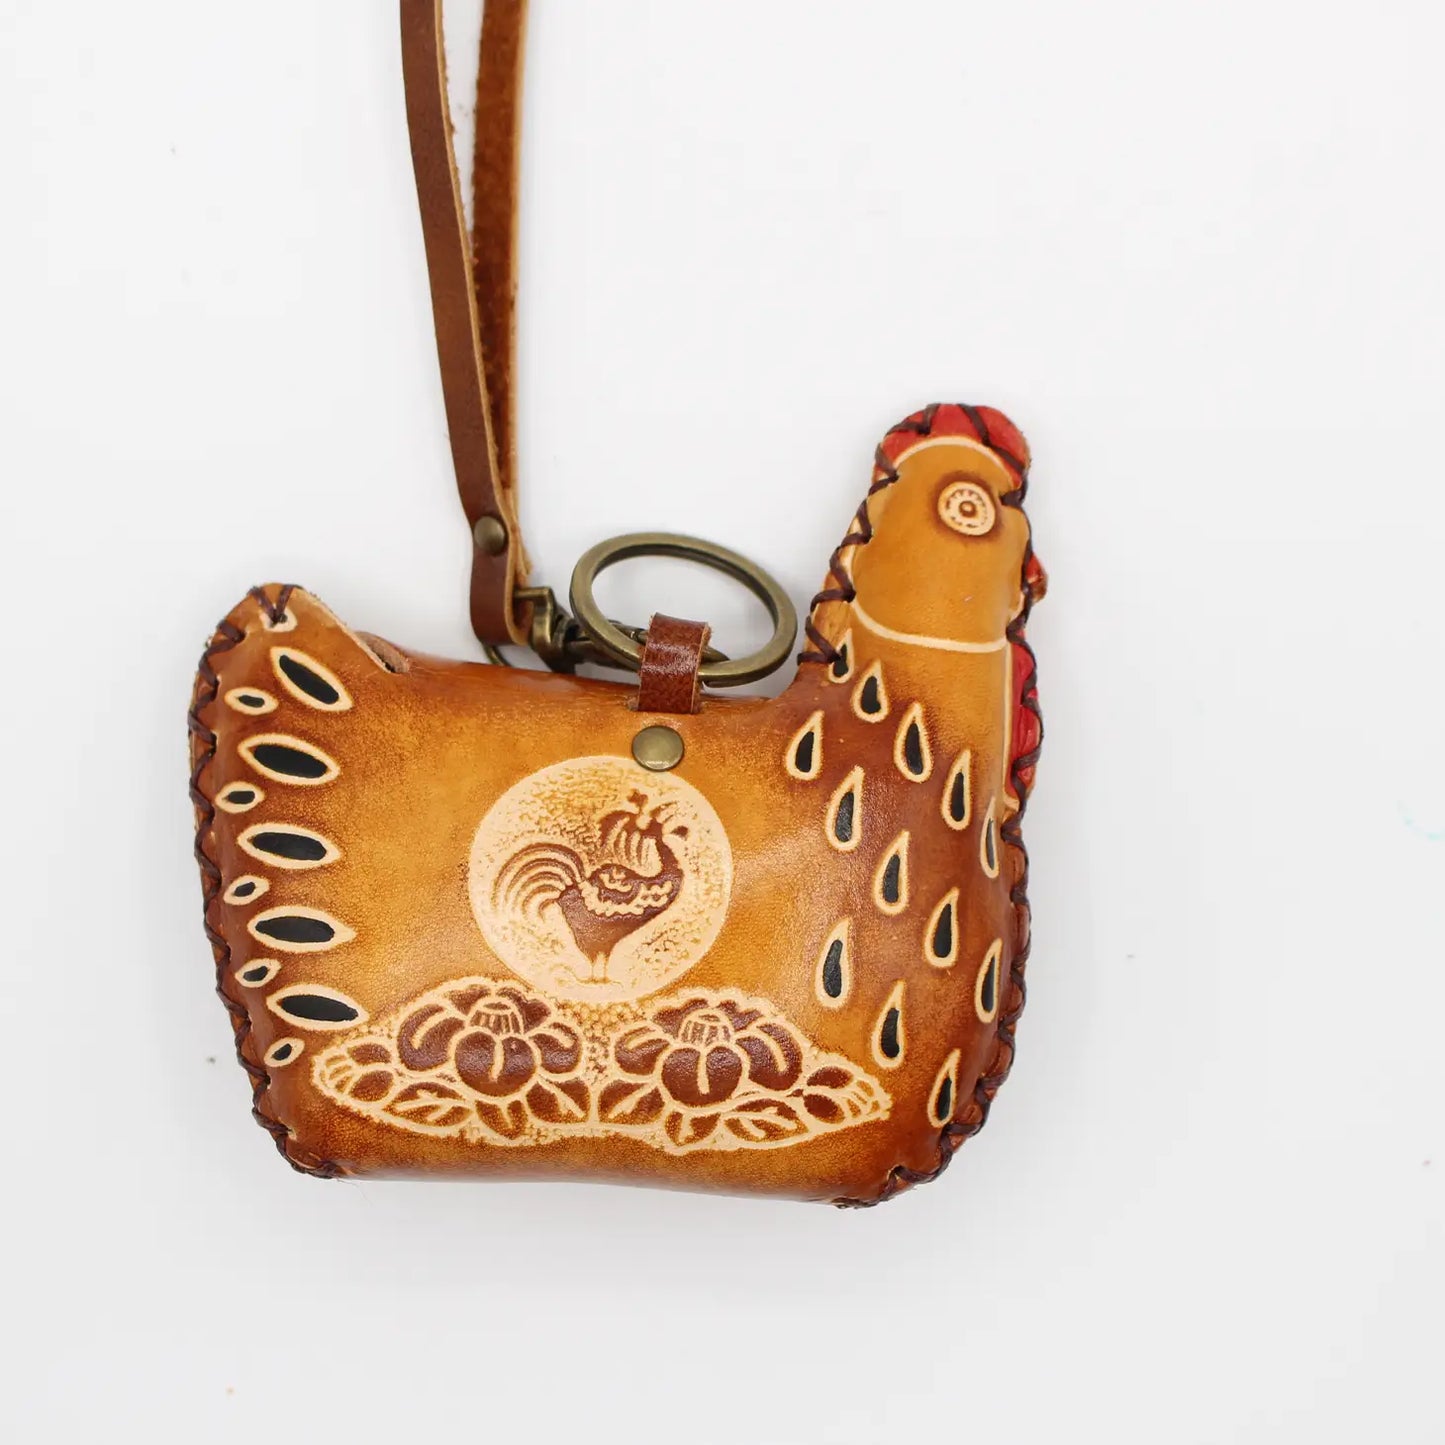 Chicken Hen Wristlet - Leather Coin Purse Wallet Red Blue or Brown